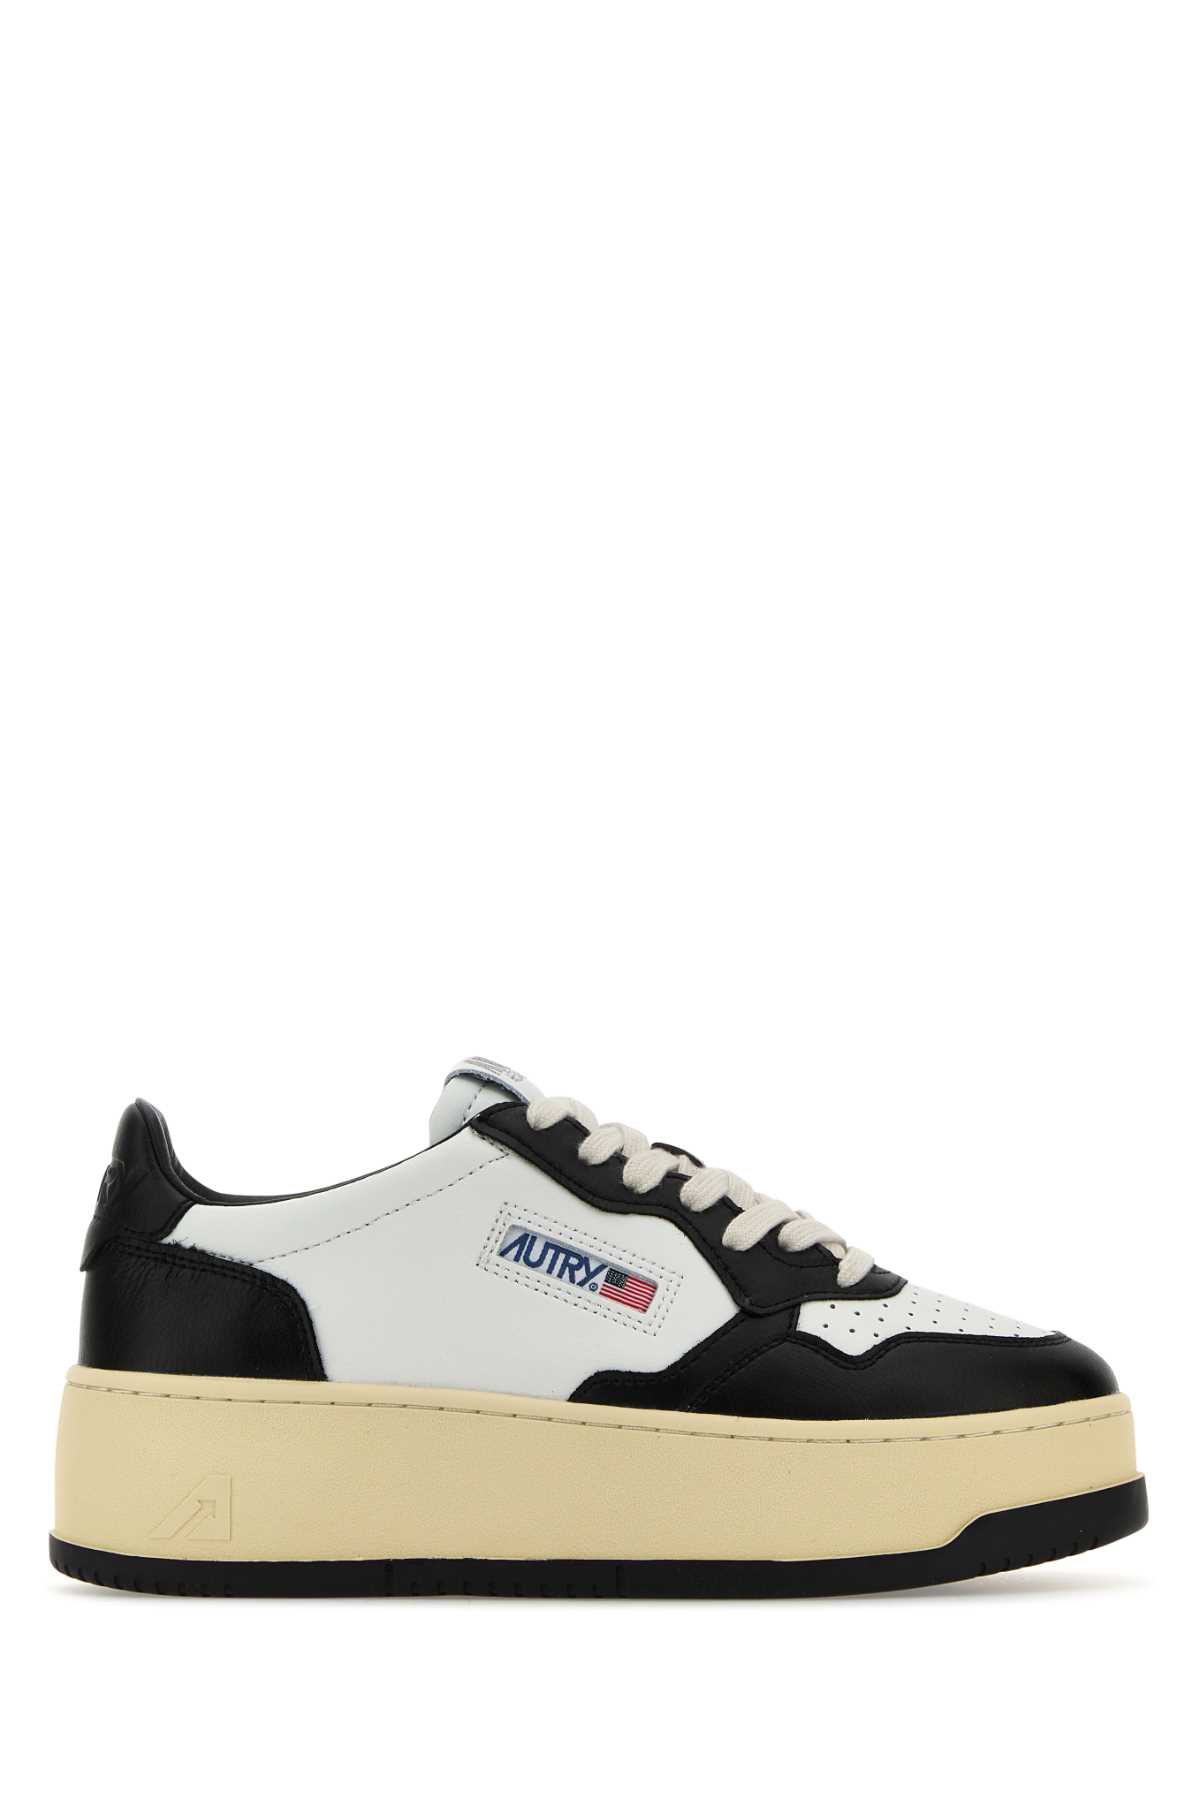 AUTRY TWO-TONE LEATHER PLATFORM LOW WOM SNEAKERS